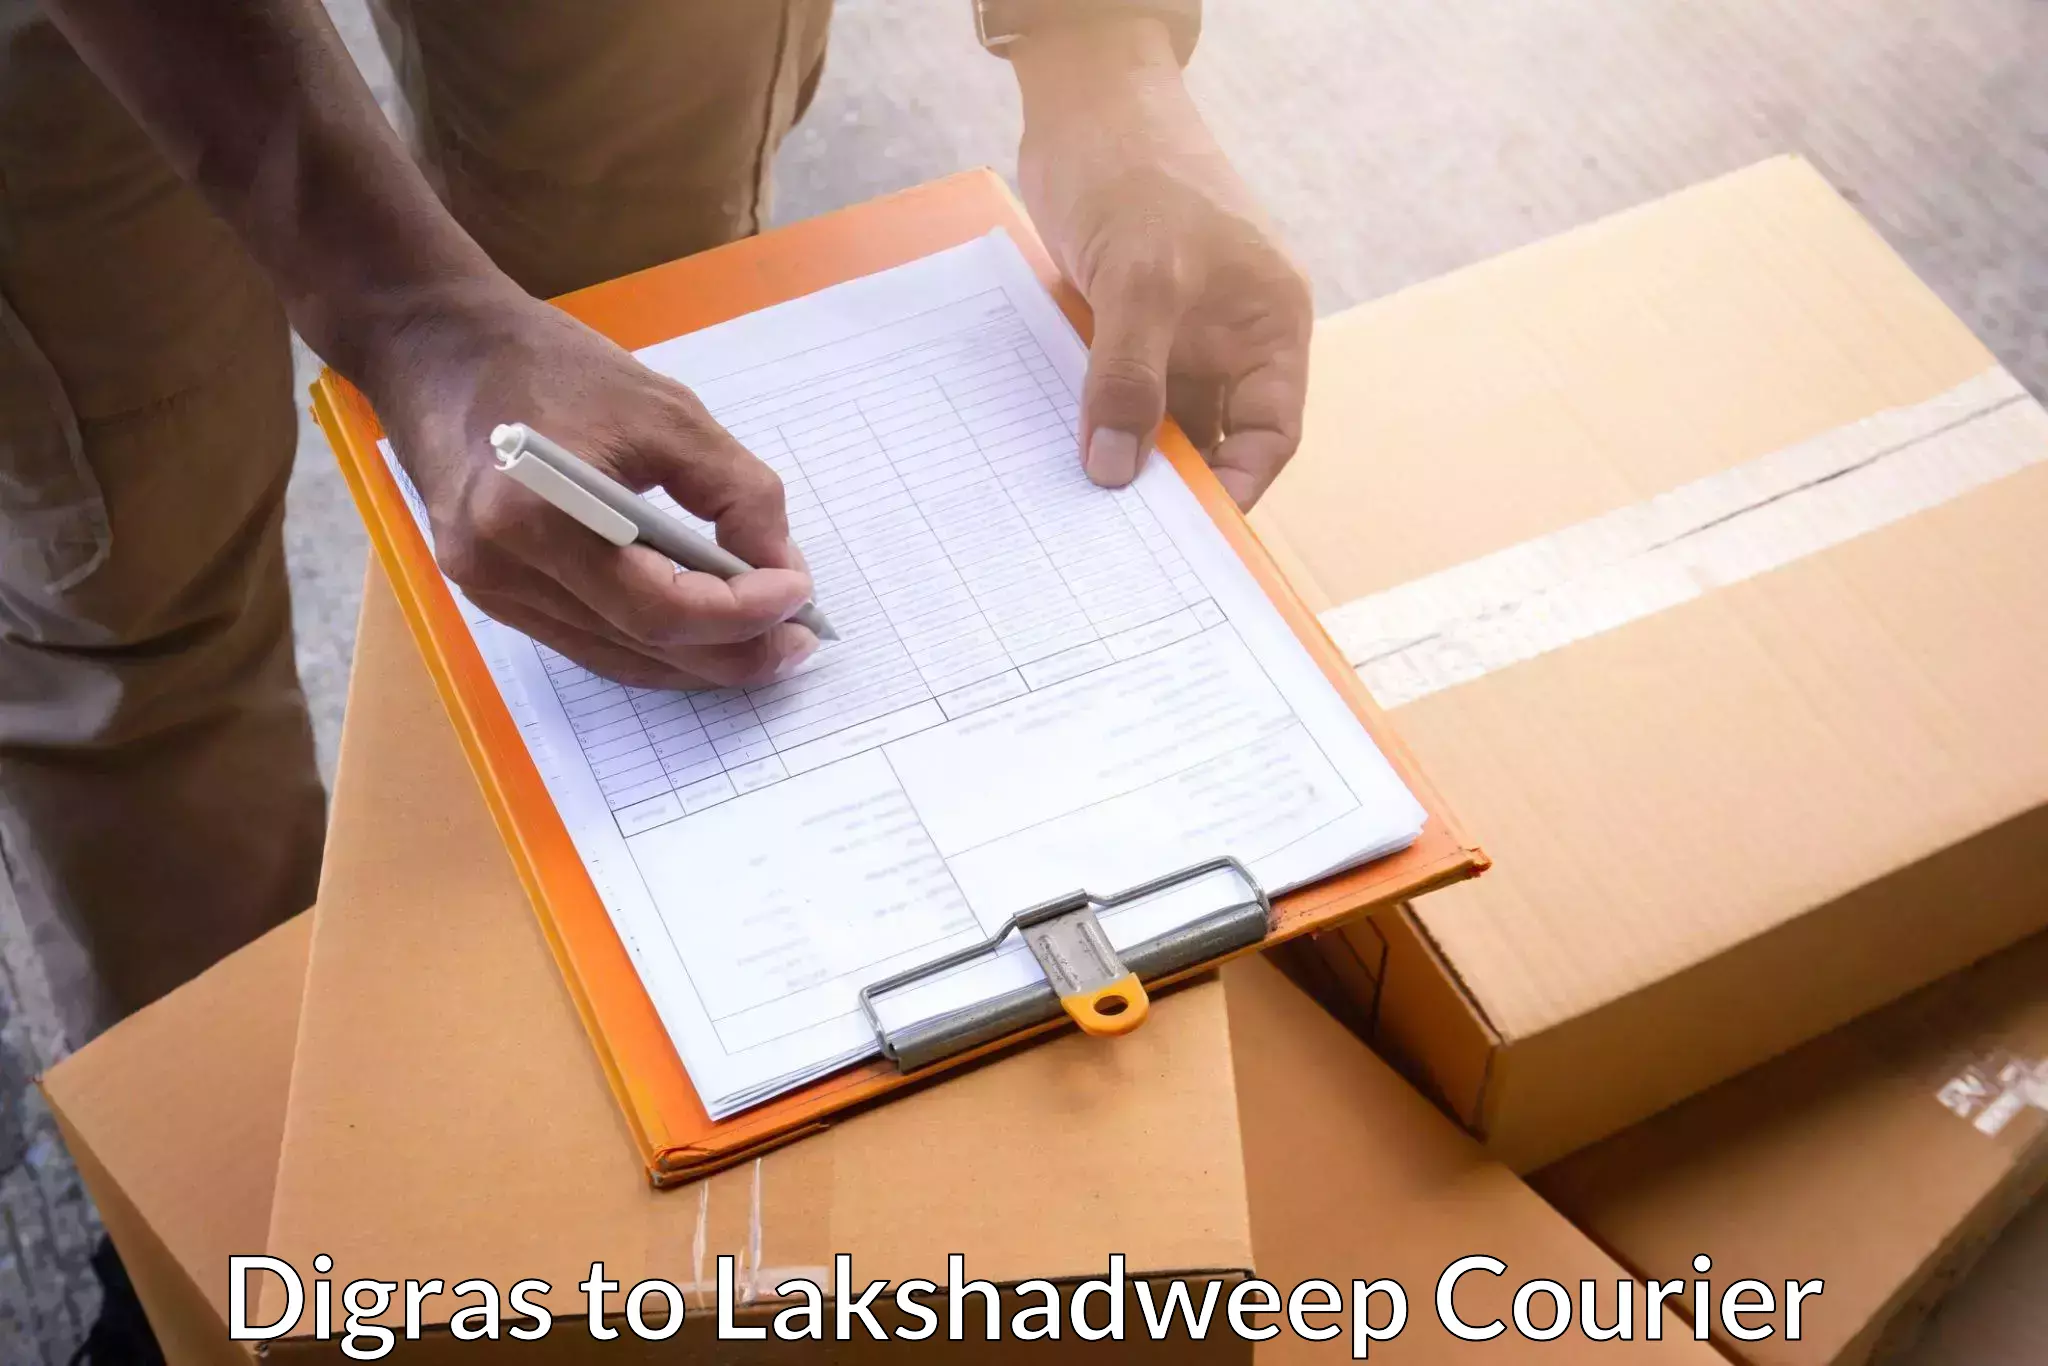 Corporate courier solutions Digras to Lakshadweep